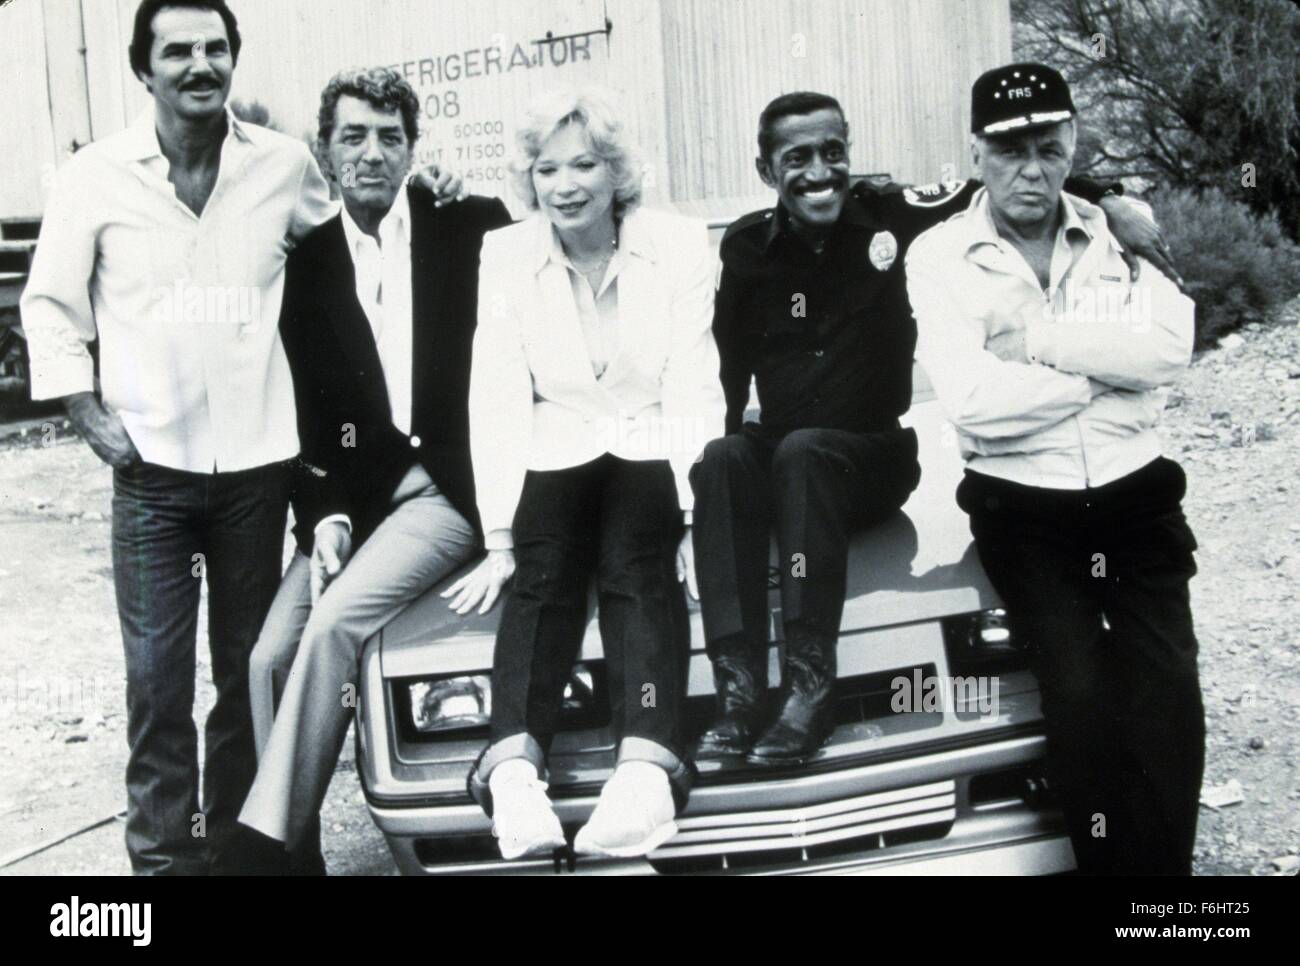 RELEASE DATE: June 29, 1984  MOVIE TITLE: Cannonball Run II  DIRECTOR: Hal Needham  STUDIO: Warner Bros.   PLOT: Our racers are back for a second cannonball run - the illegal race that takes place all over the country... Almost every star of the first film is here, along with new ones. Will J.J. McClure finally be the winner this time  PICTURED: SAMMY DAVIS JR as Morris Fenderbaum, SHIRLEY MACLAINE as Veronica, DEAN MARTIN as Jamie Blake and BURT REYNOLDS as J.J. McClure  (Credit Image: c Warner Bros./Entertainment Pictures) Stock Photo